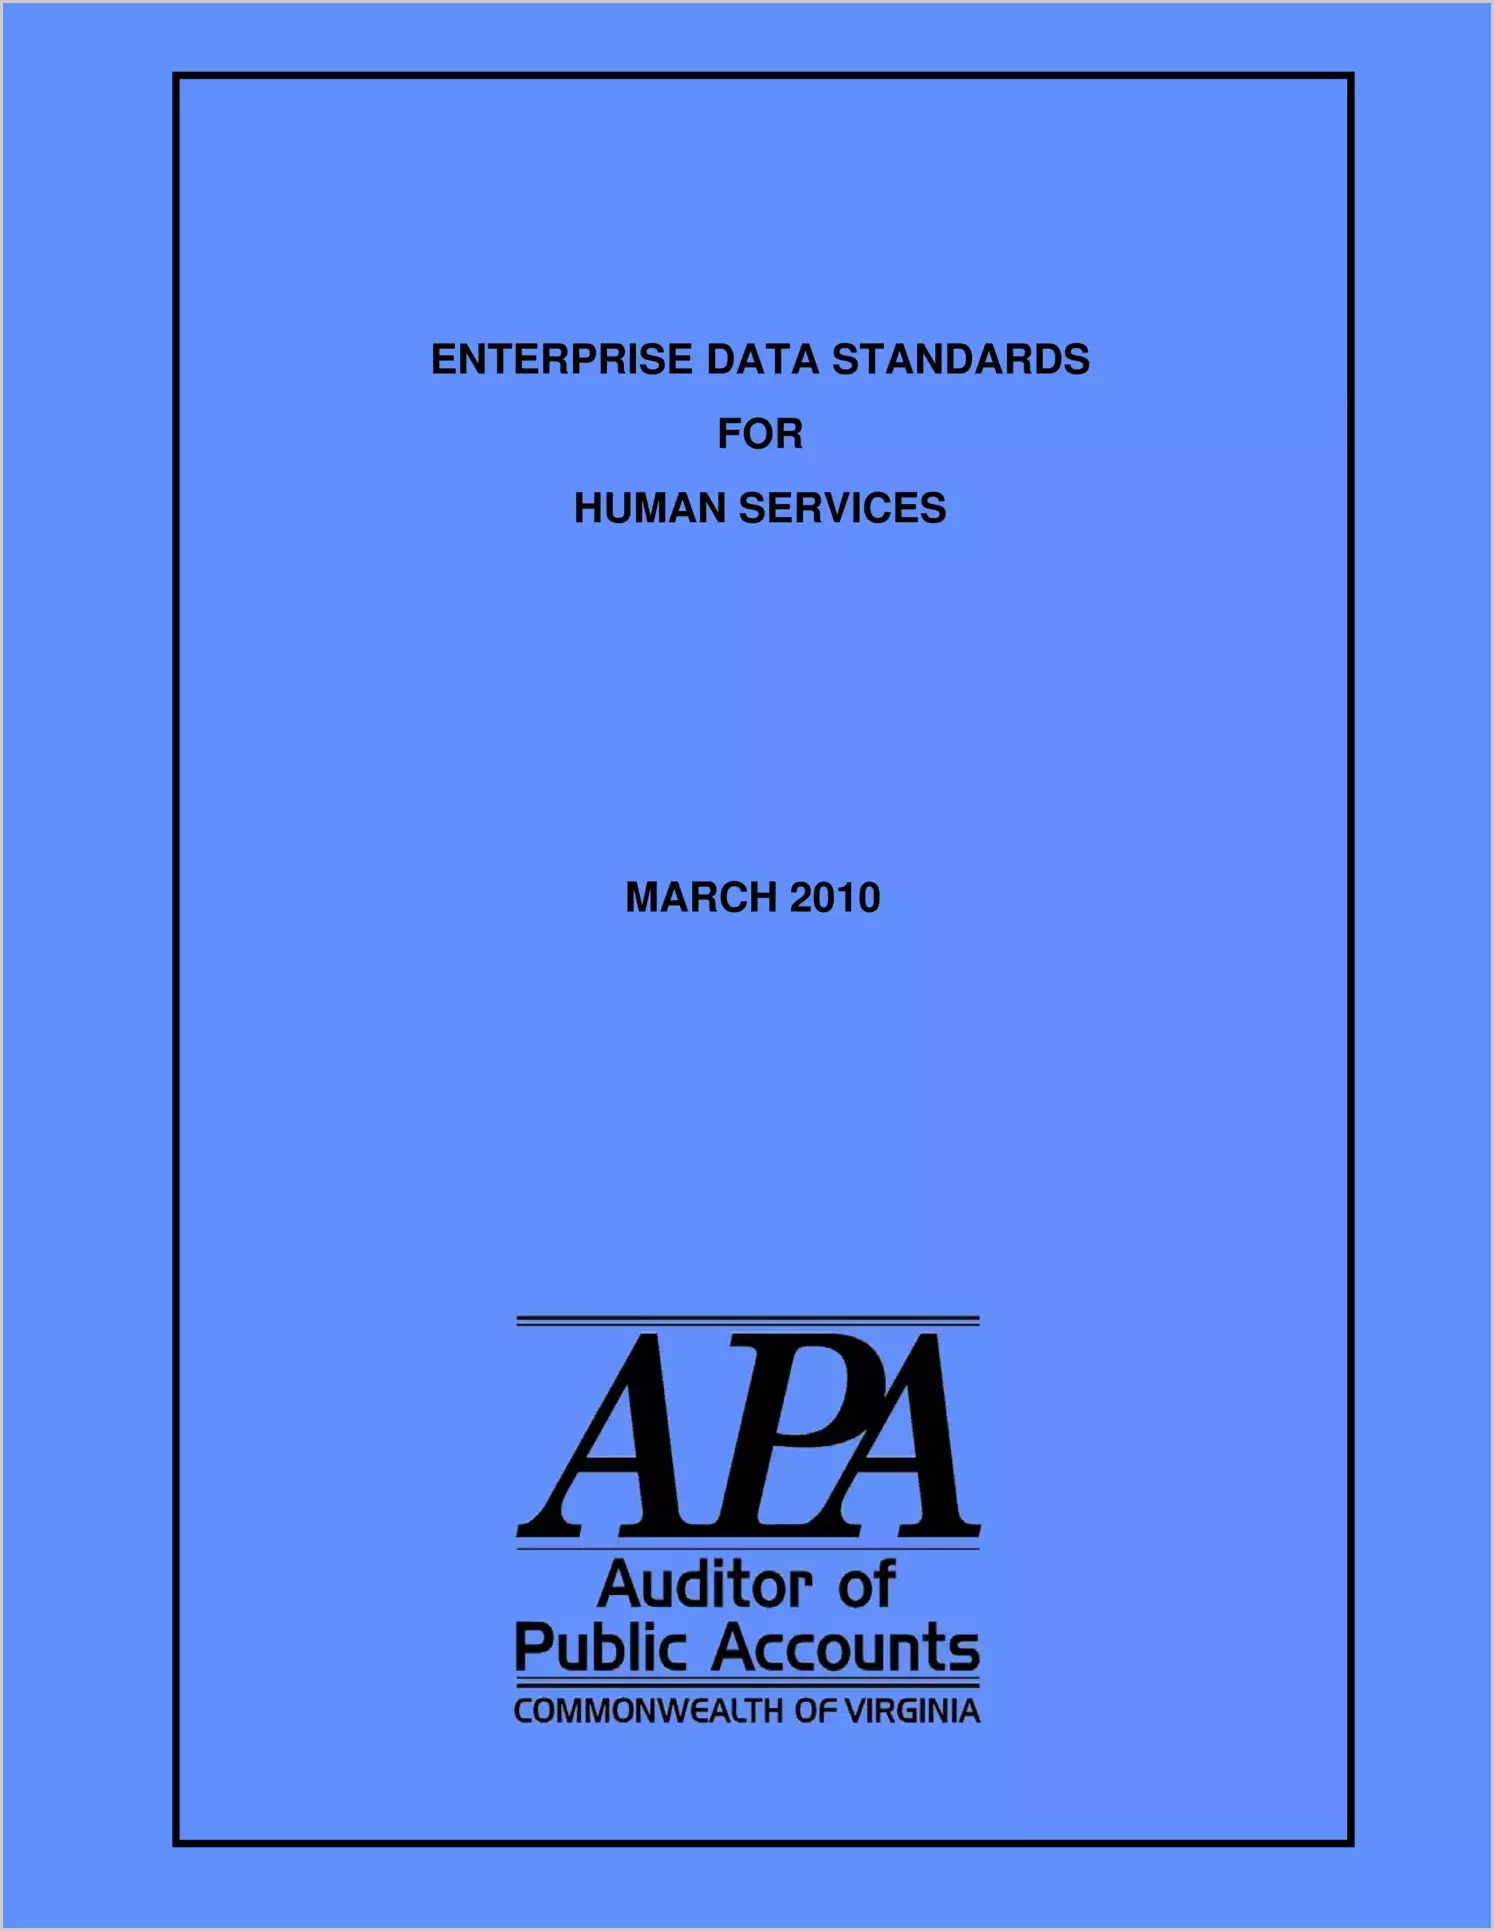 Enterprise Data Standards for Human Services as of March 2010